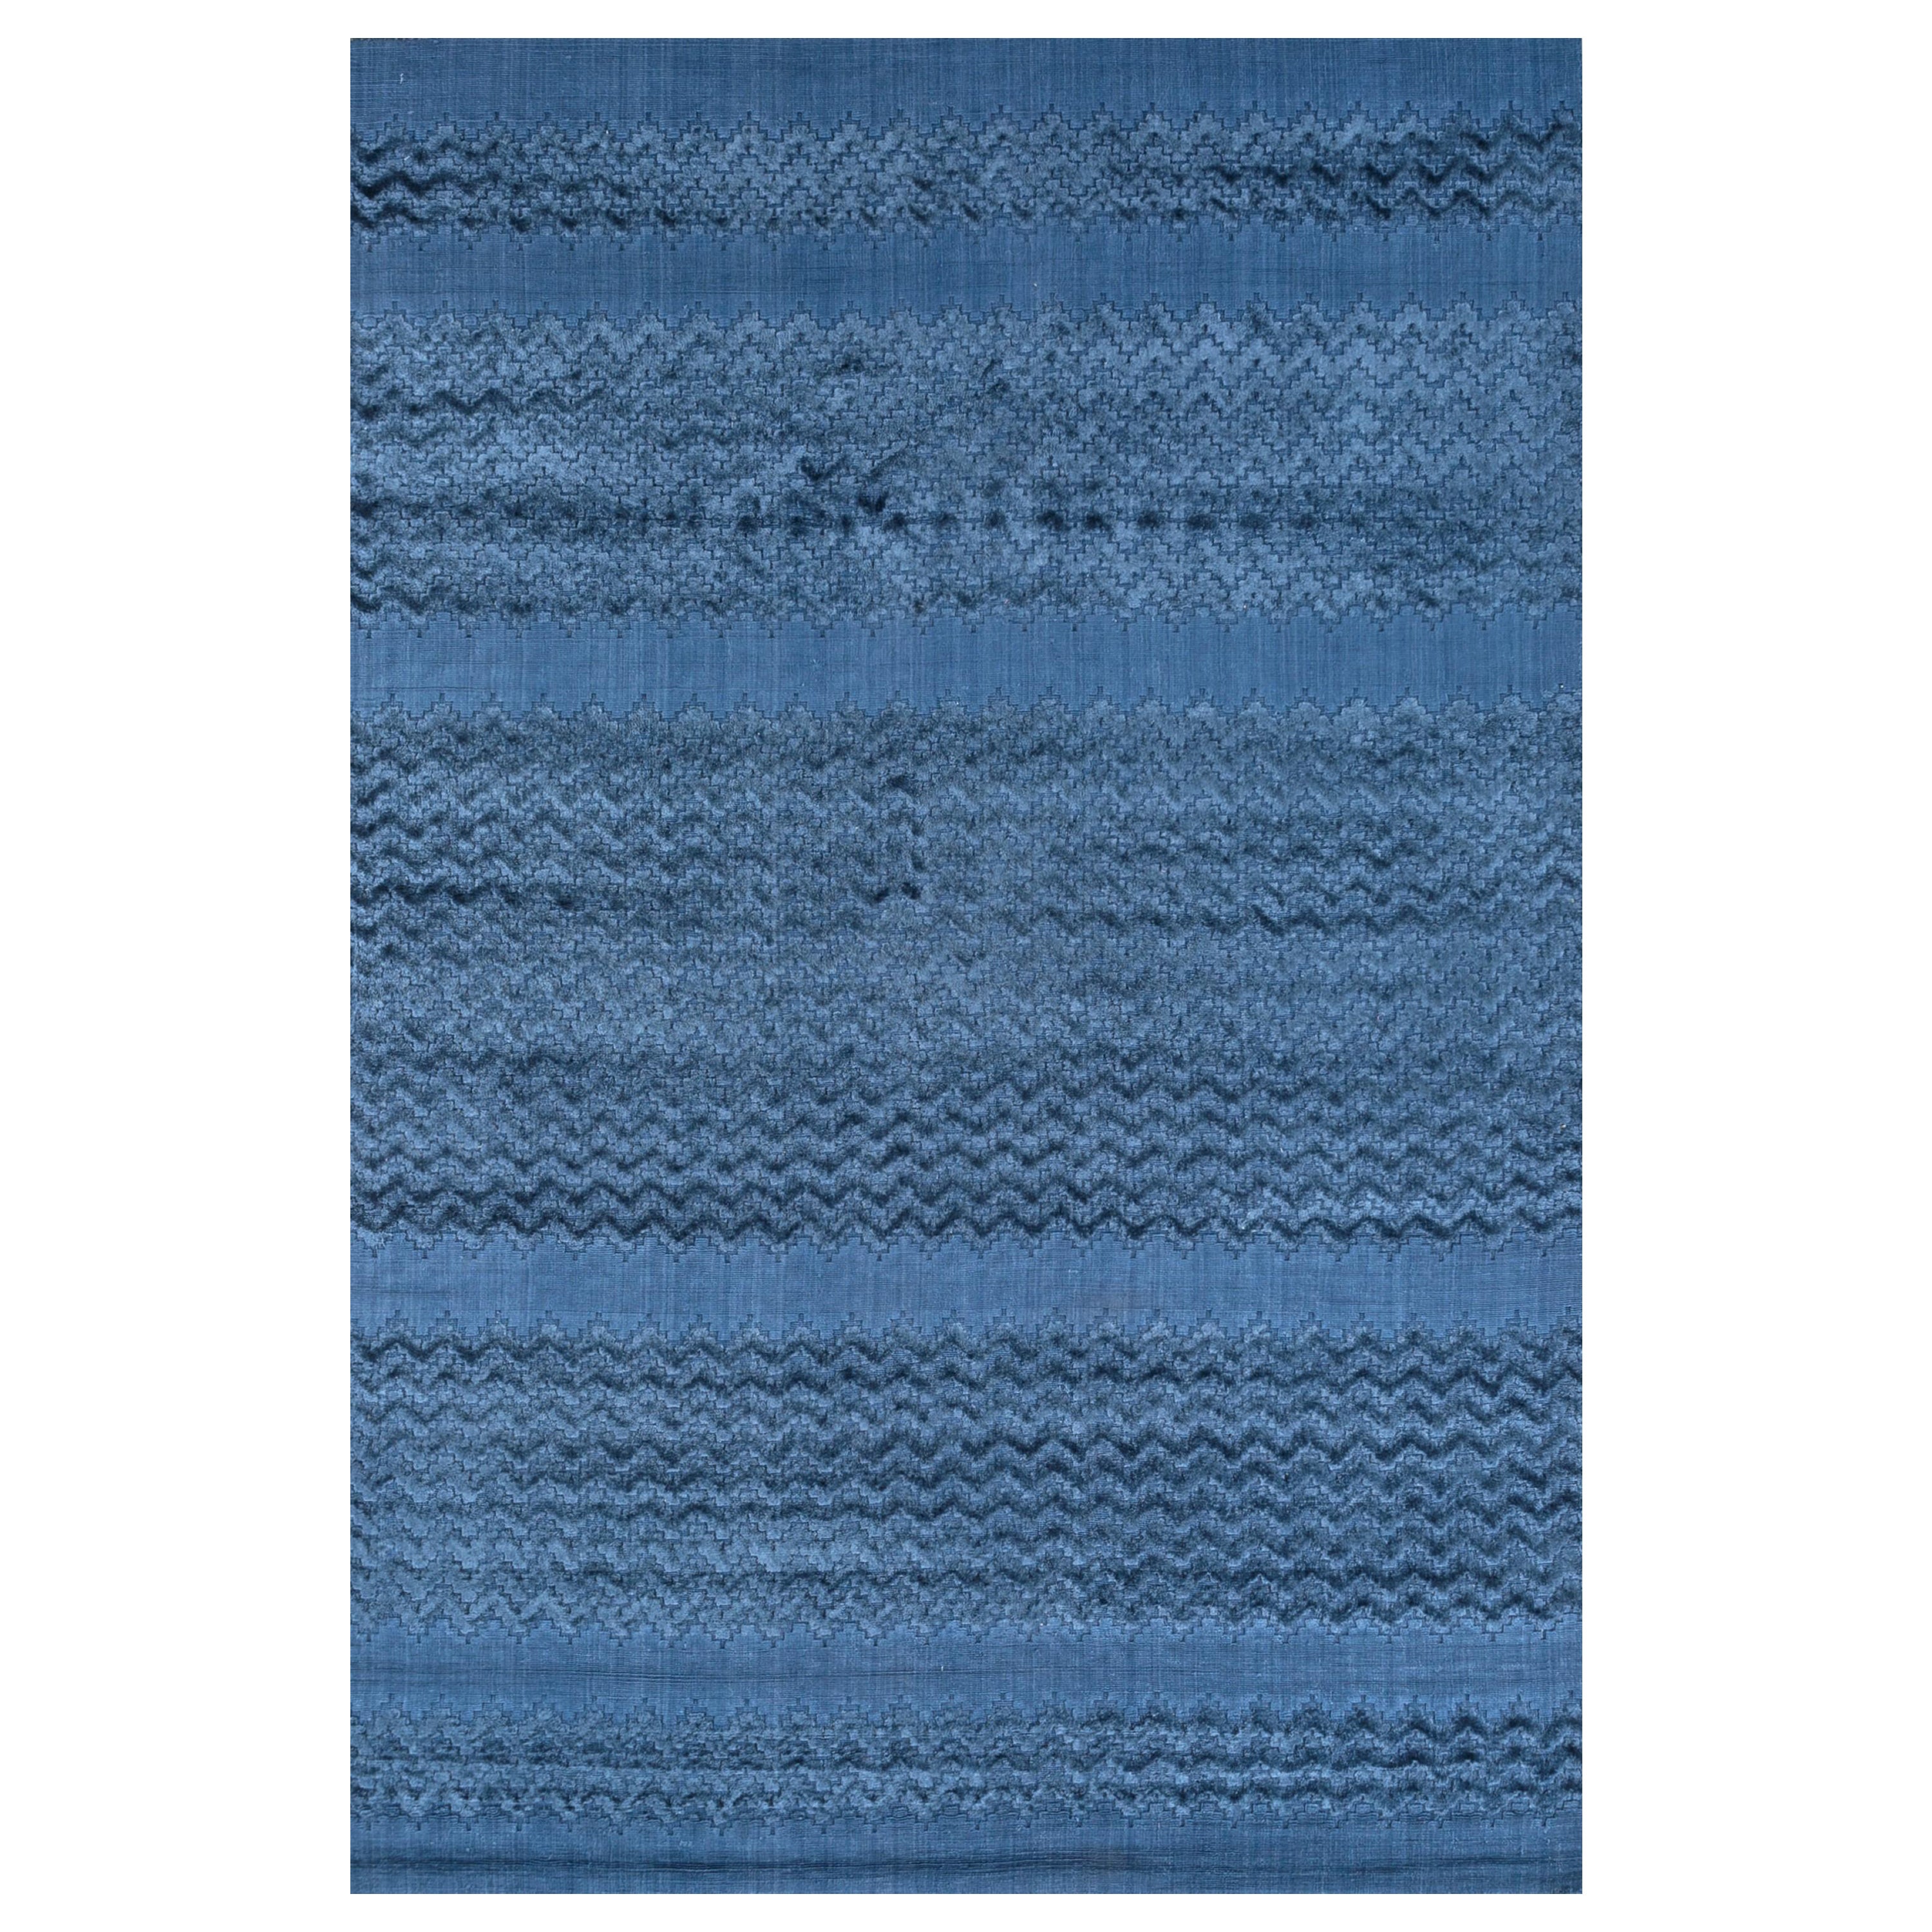 Starry Dive Navy Blue & Navy Blue 180x270cm Hand Loom Rug For Sale